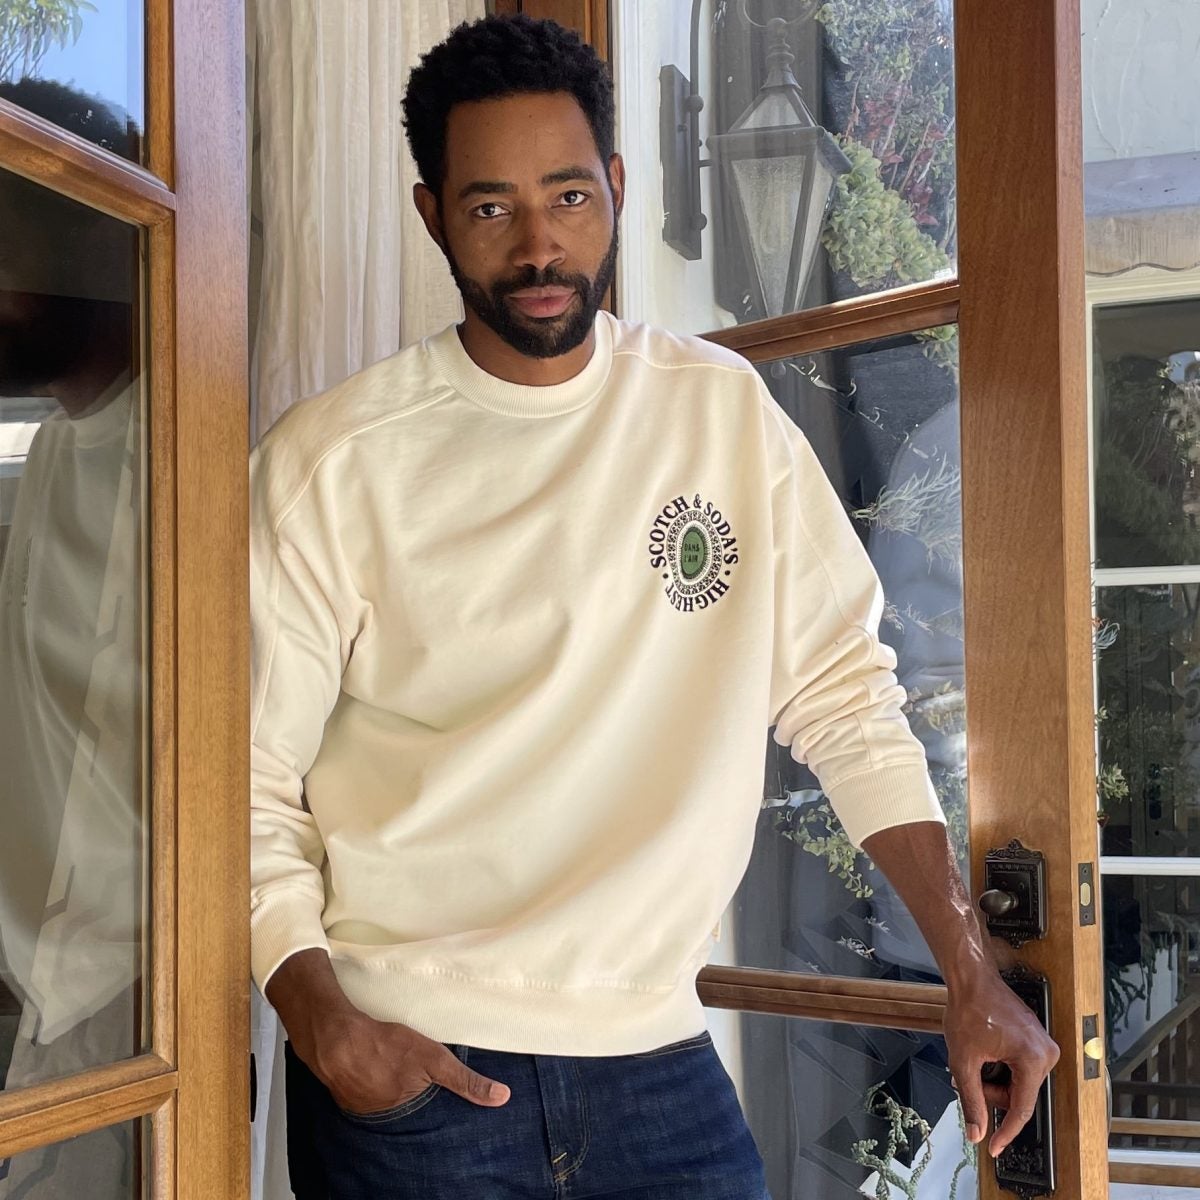 Won't He Do It! Lawrence Got A Job And Found Some Fashion Sense—According To 'Insecure' Actor Jay Ellis